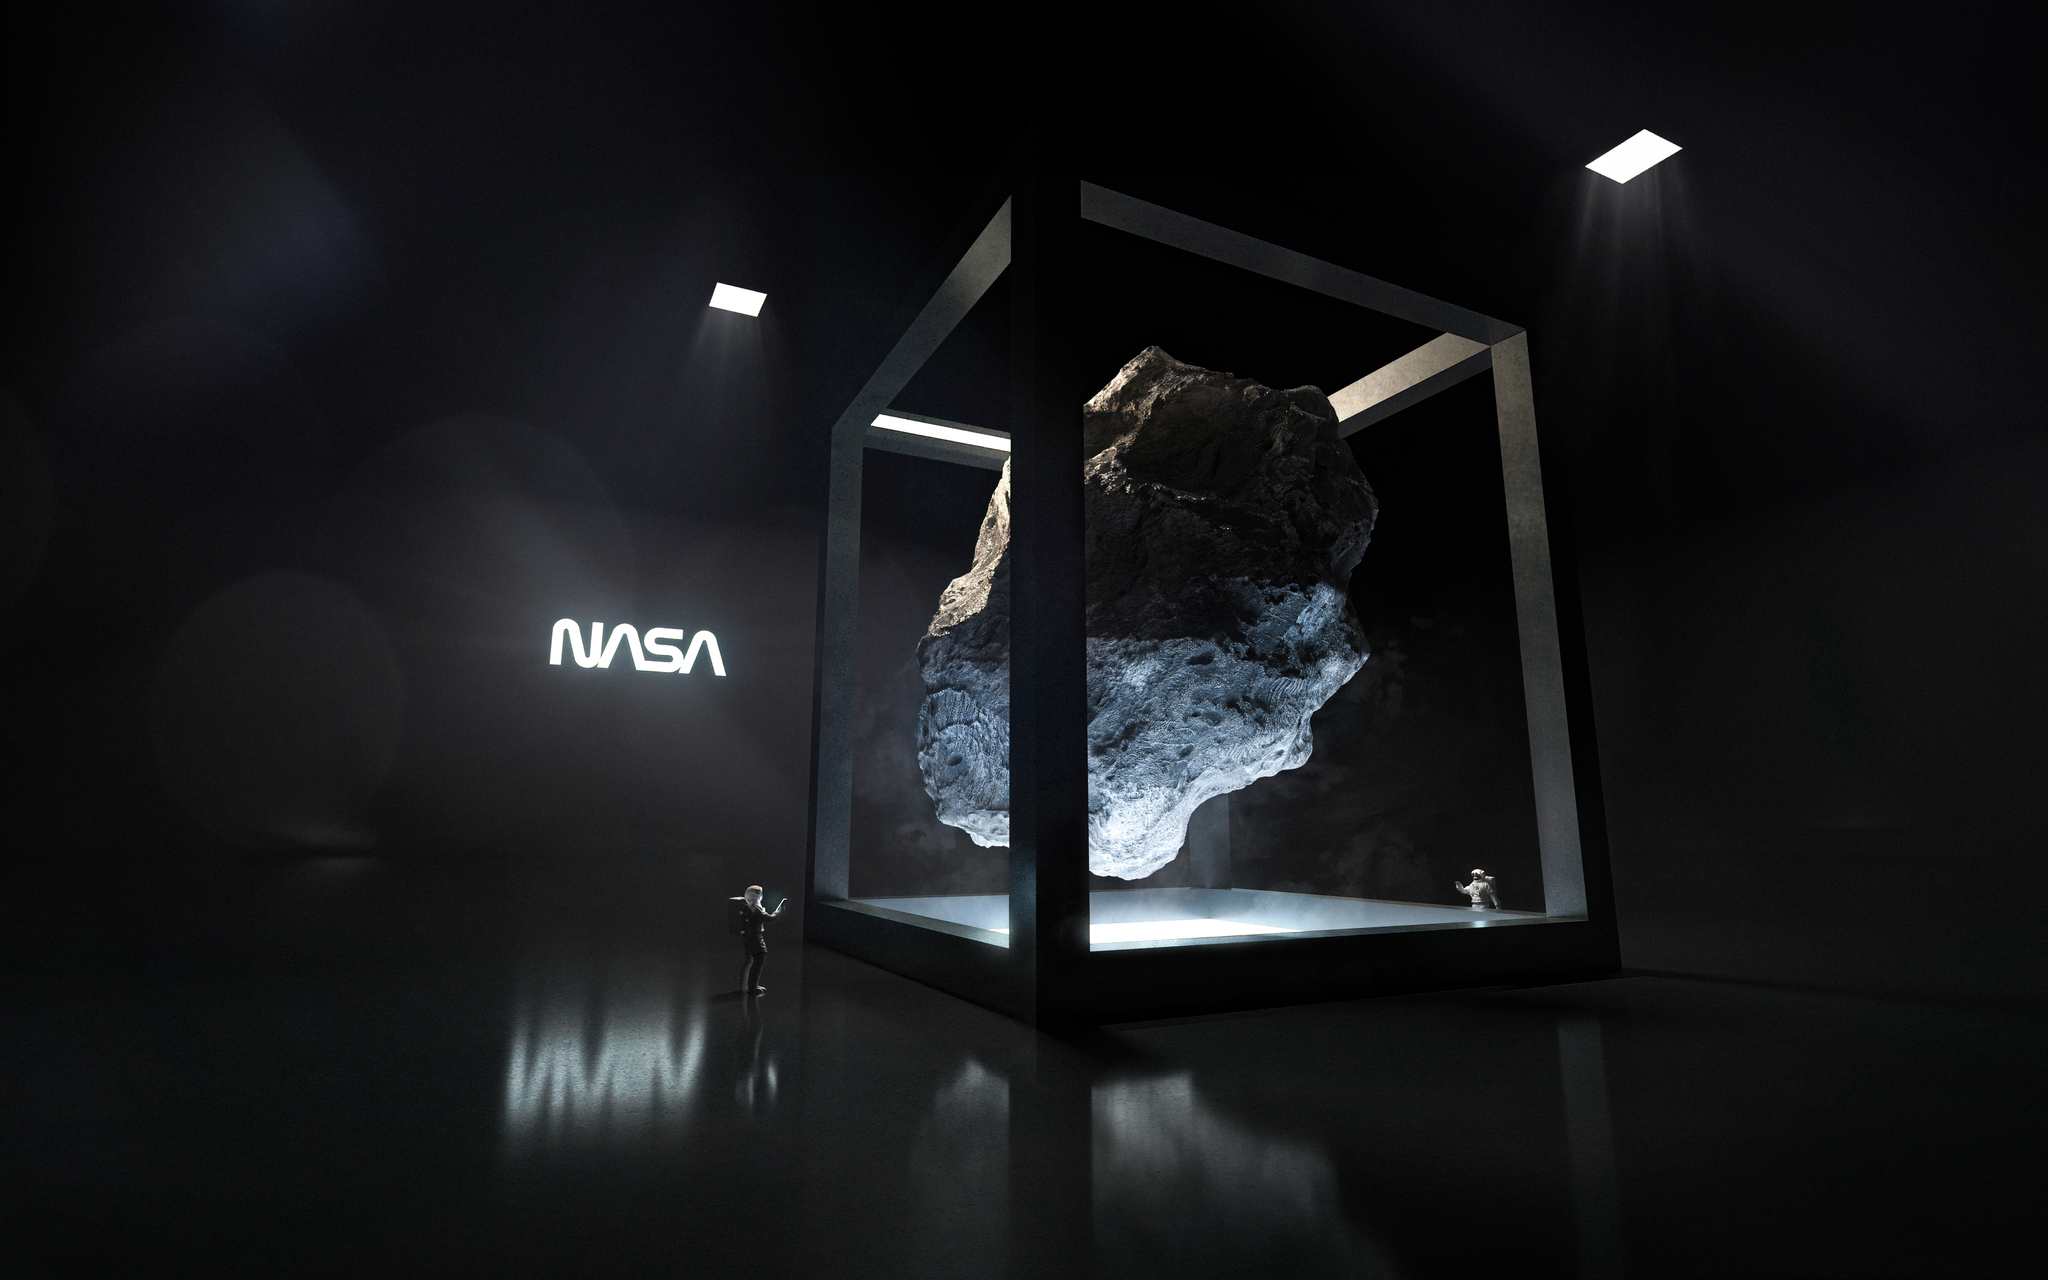 Laboratory - My, Space, Asteroid, Meteorite, NASA, Astronaut, Science fiction, Art, 3D, Photoshop, Computer graphics, 3D modeling